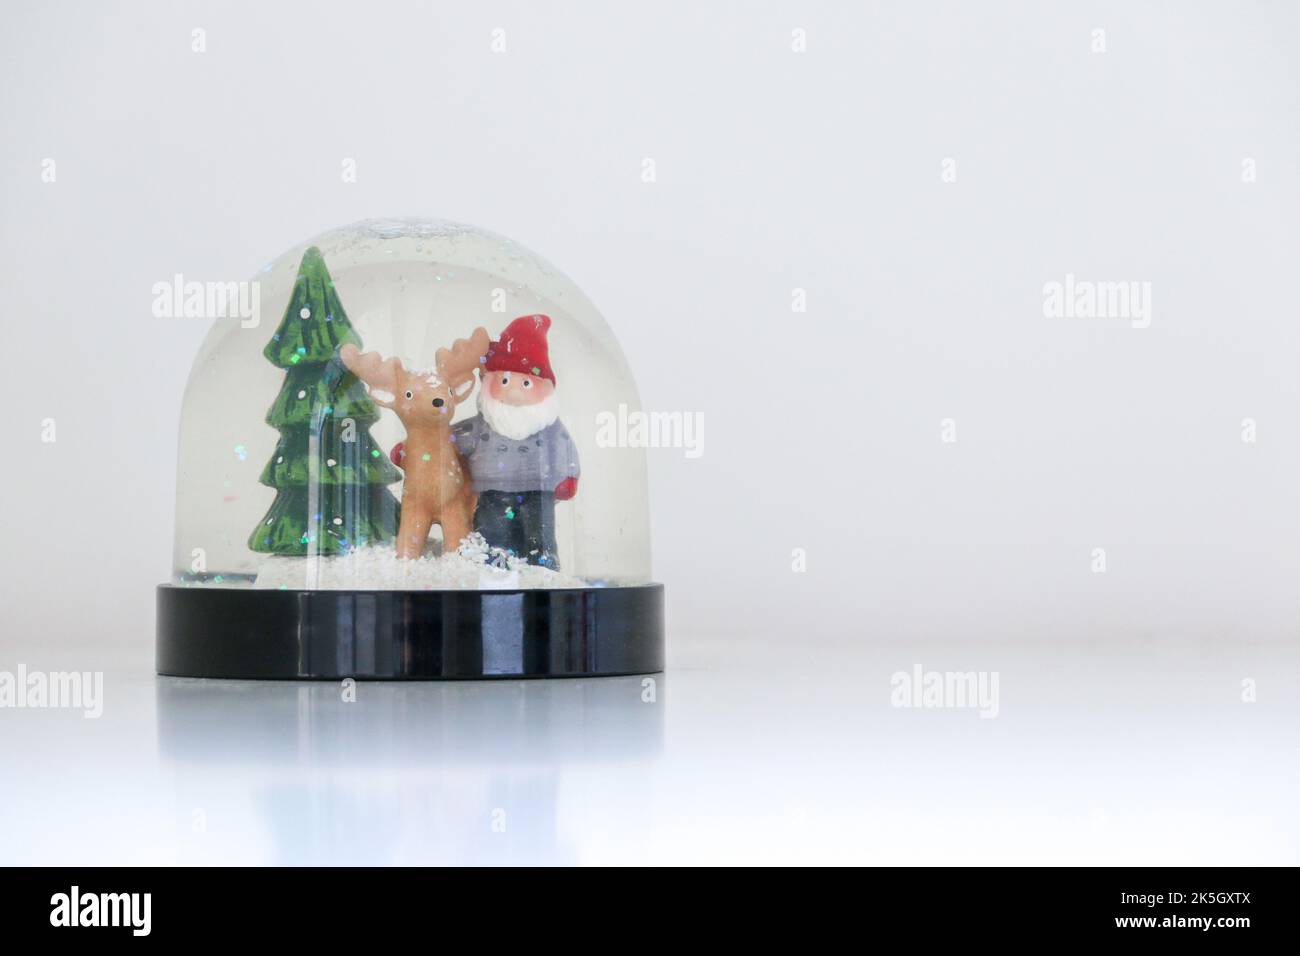 Christmas snow globe featuring Santa Claus, his reindeer and a Christmas tree, on white snowy background, festive ornament decoration, copy space on t Stock Photo